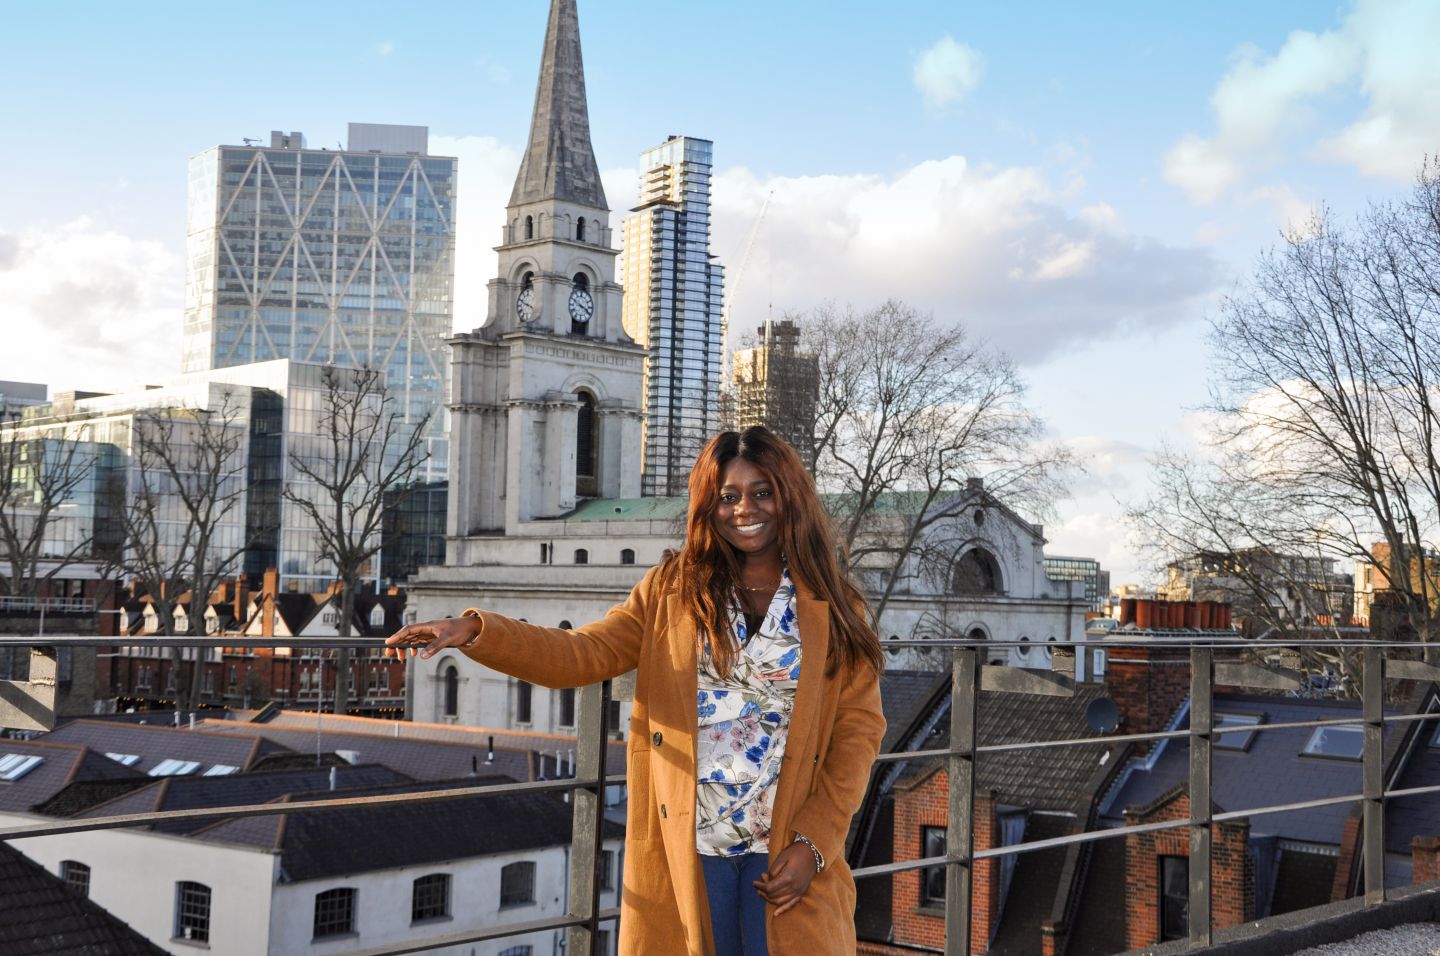 A GCU London student on the rooftop of the London campus, in March 2020